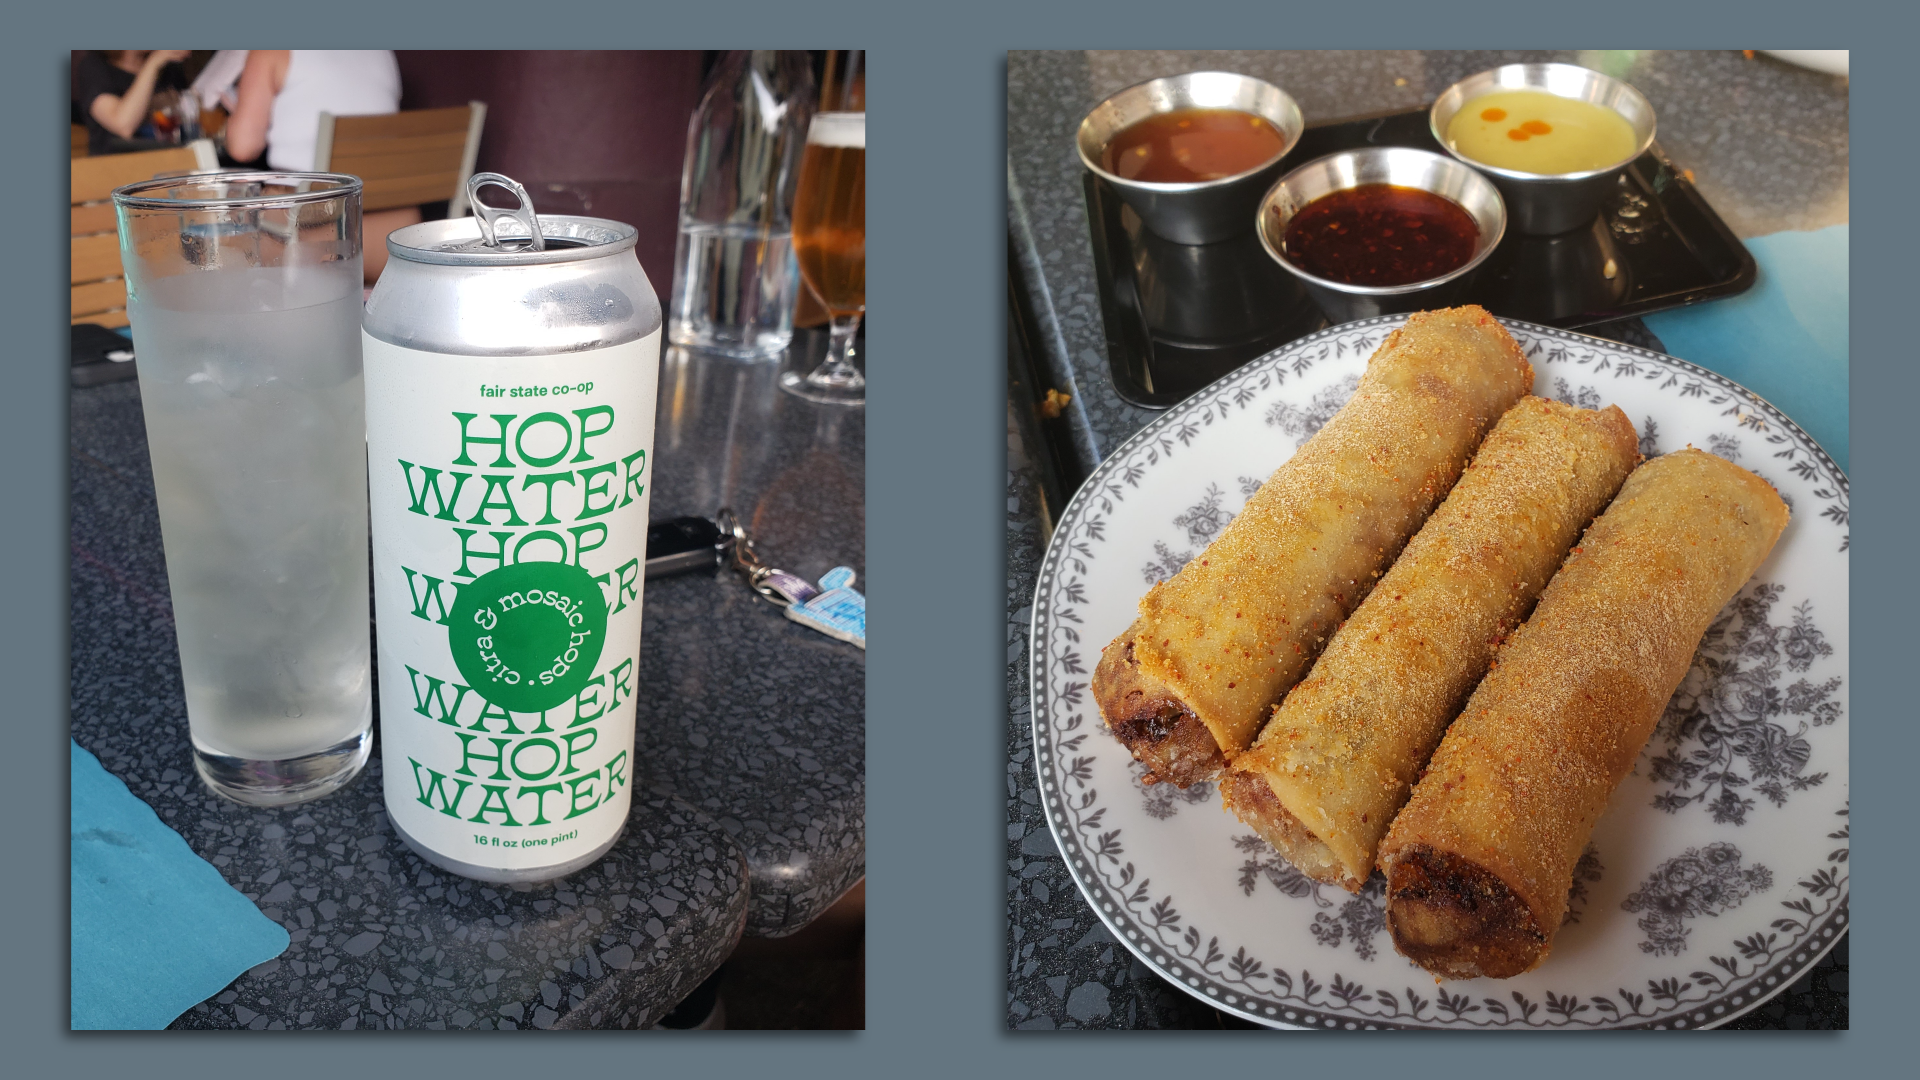 Beer and egg rolls